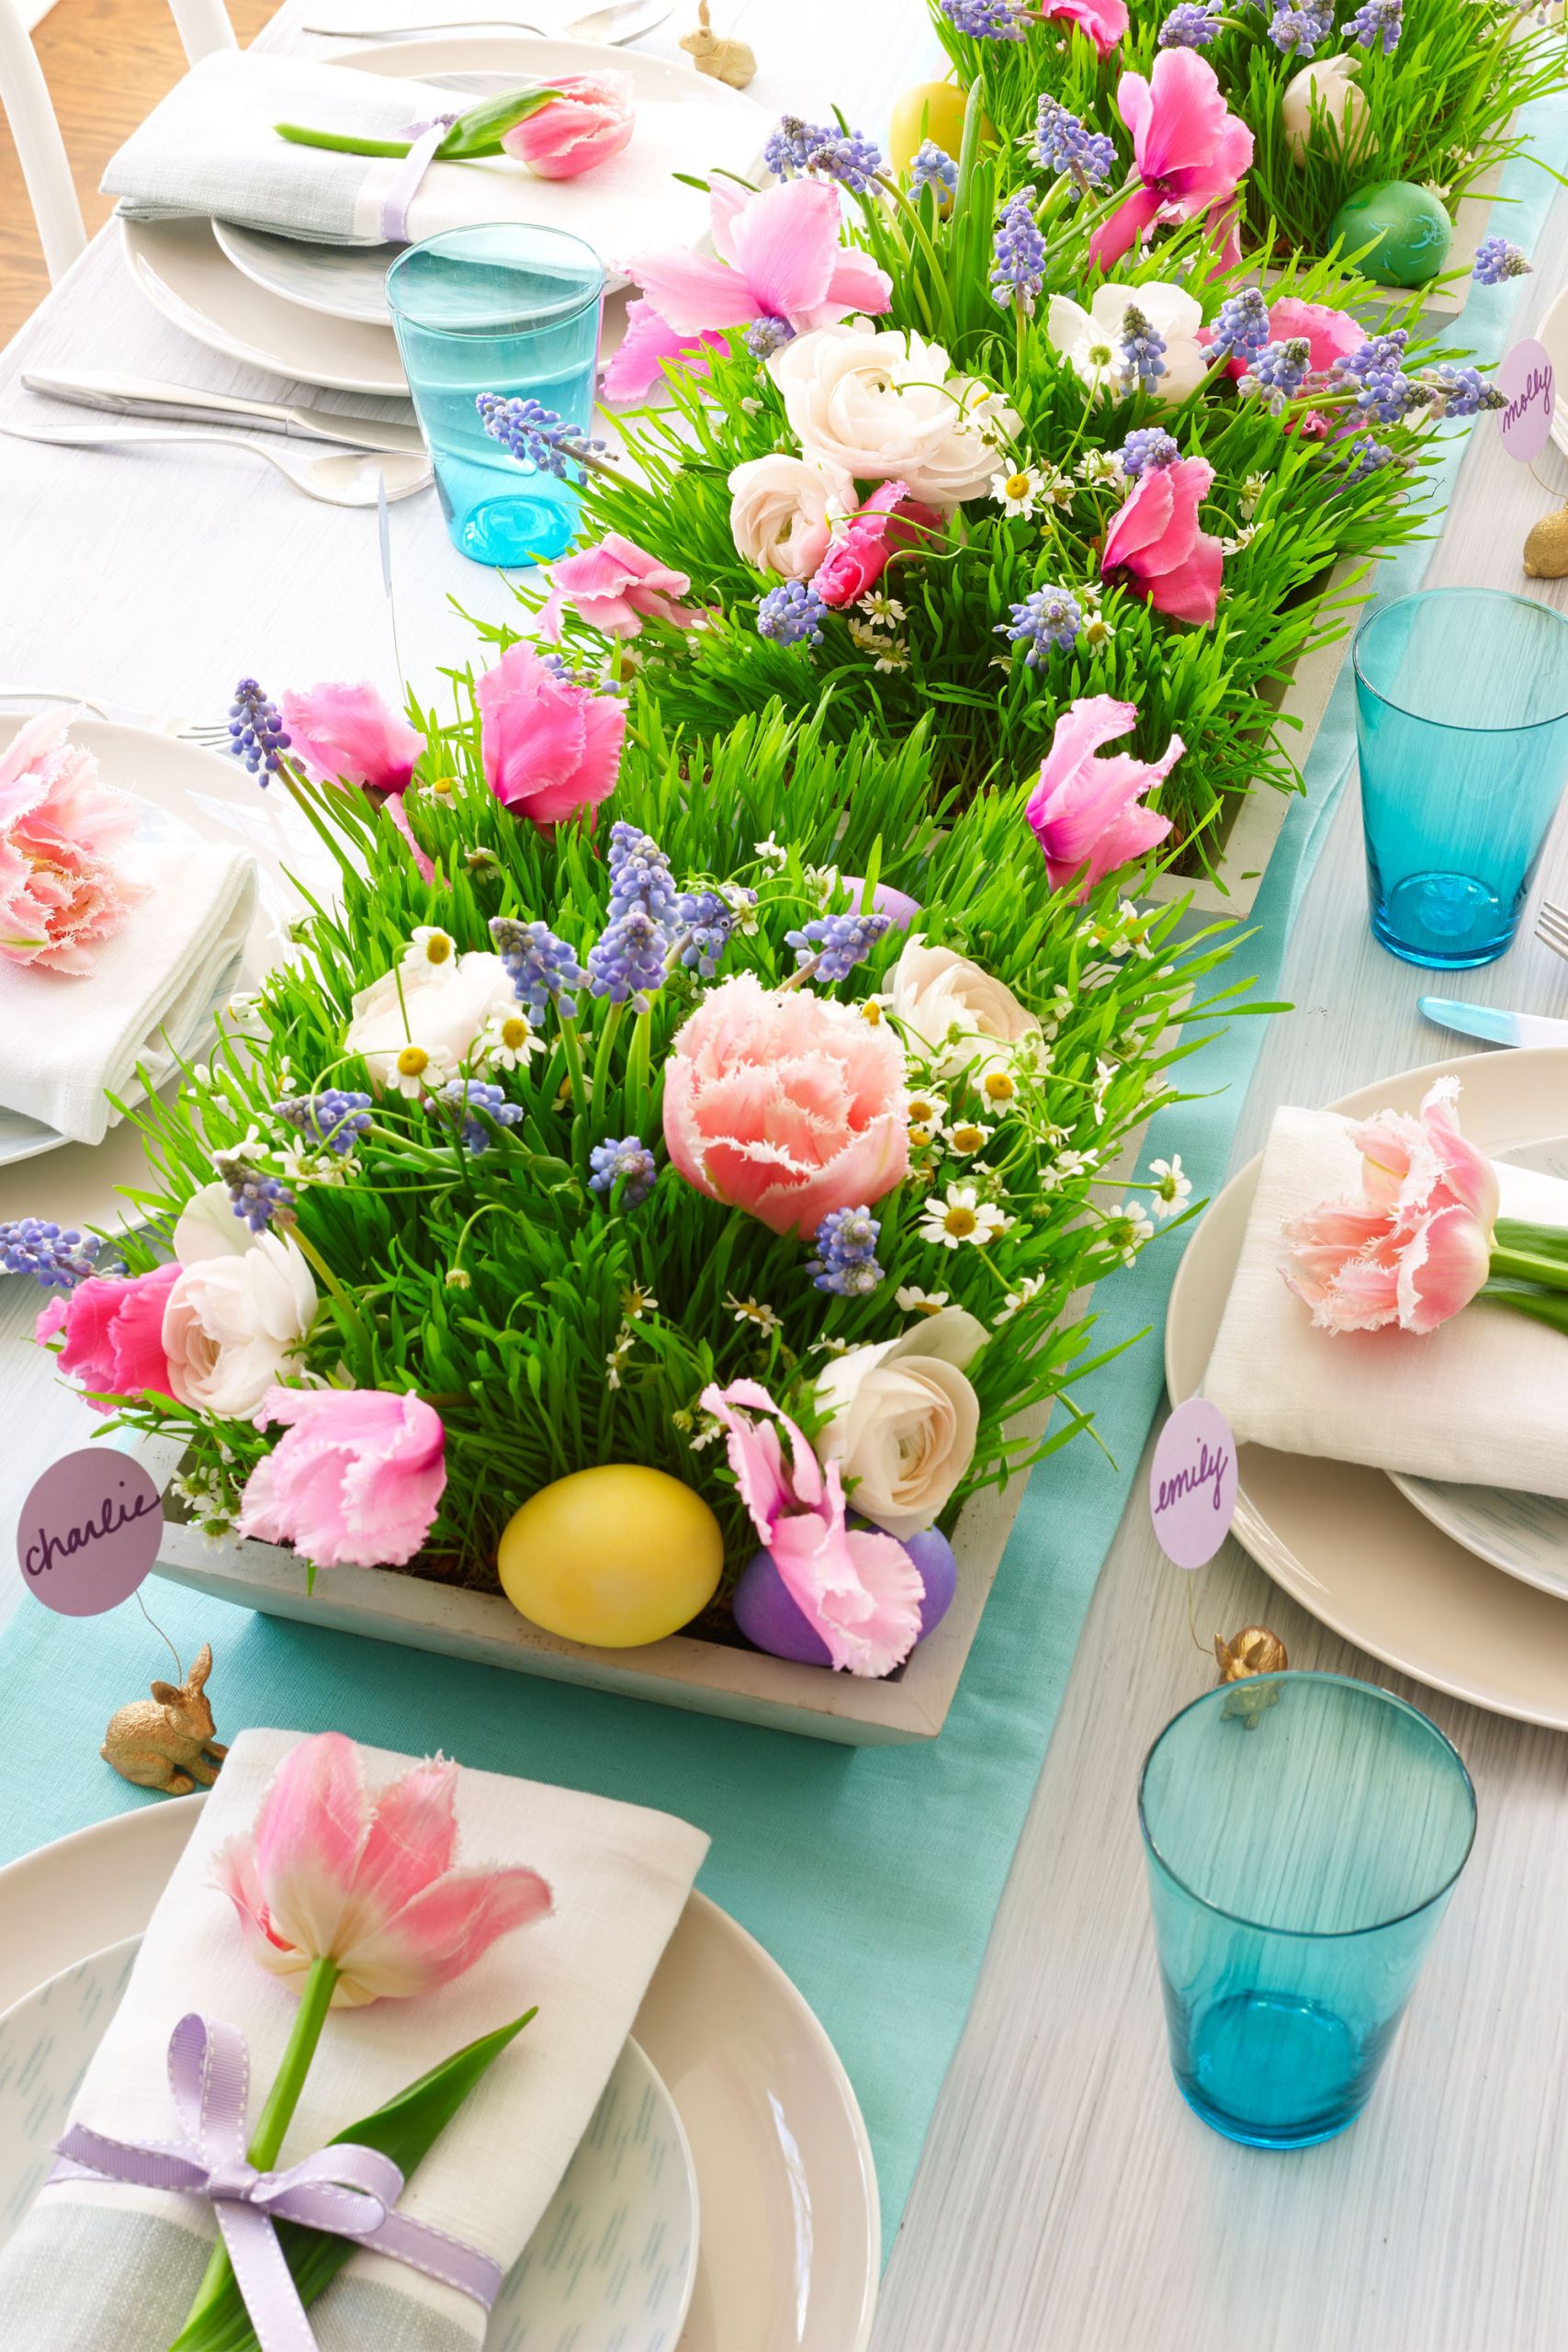 Ideas For Easter Party
 25 Easter Table Decorations Table Decor Ideas for Easter